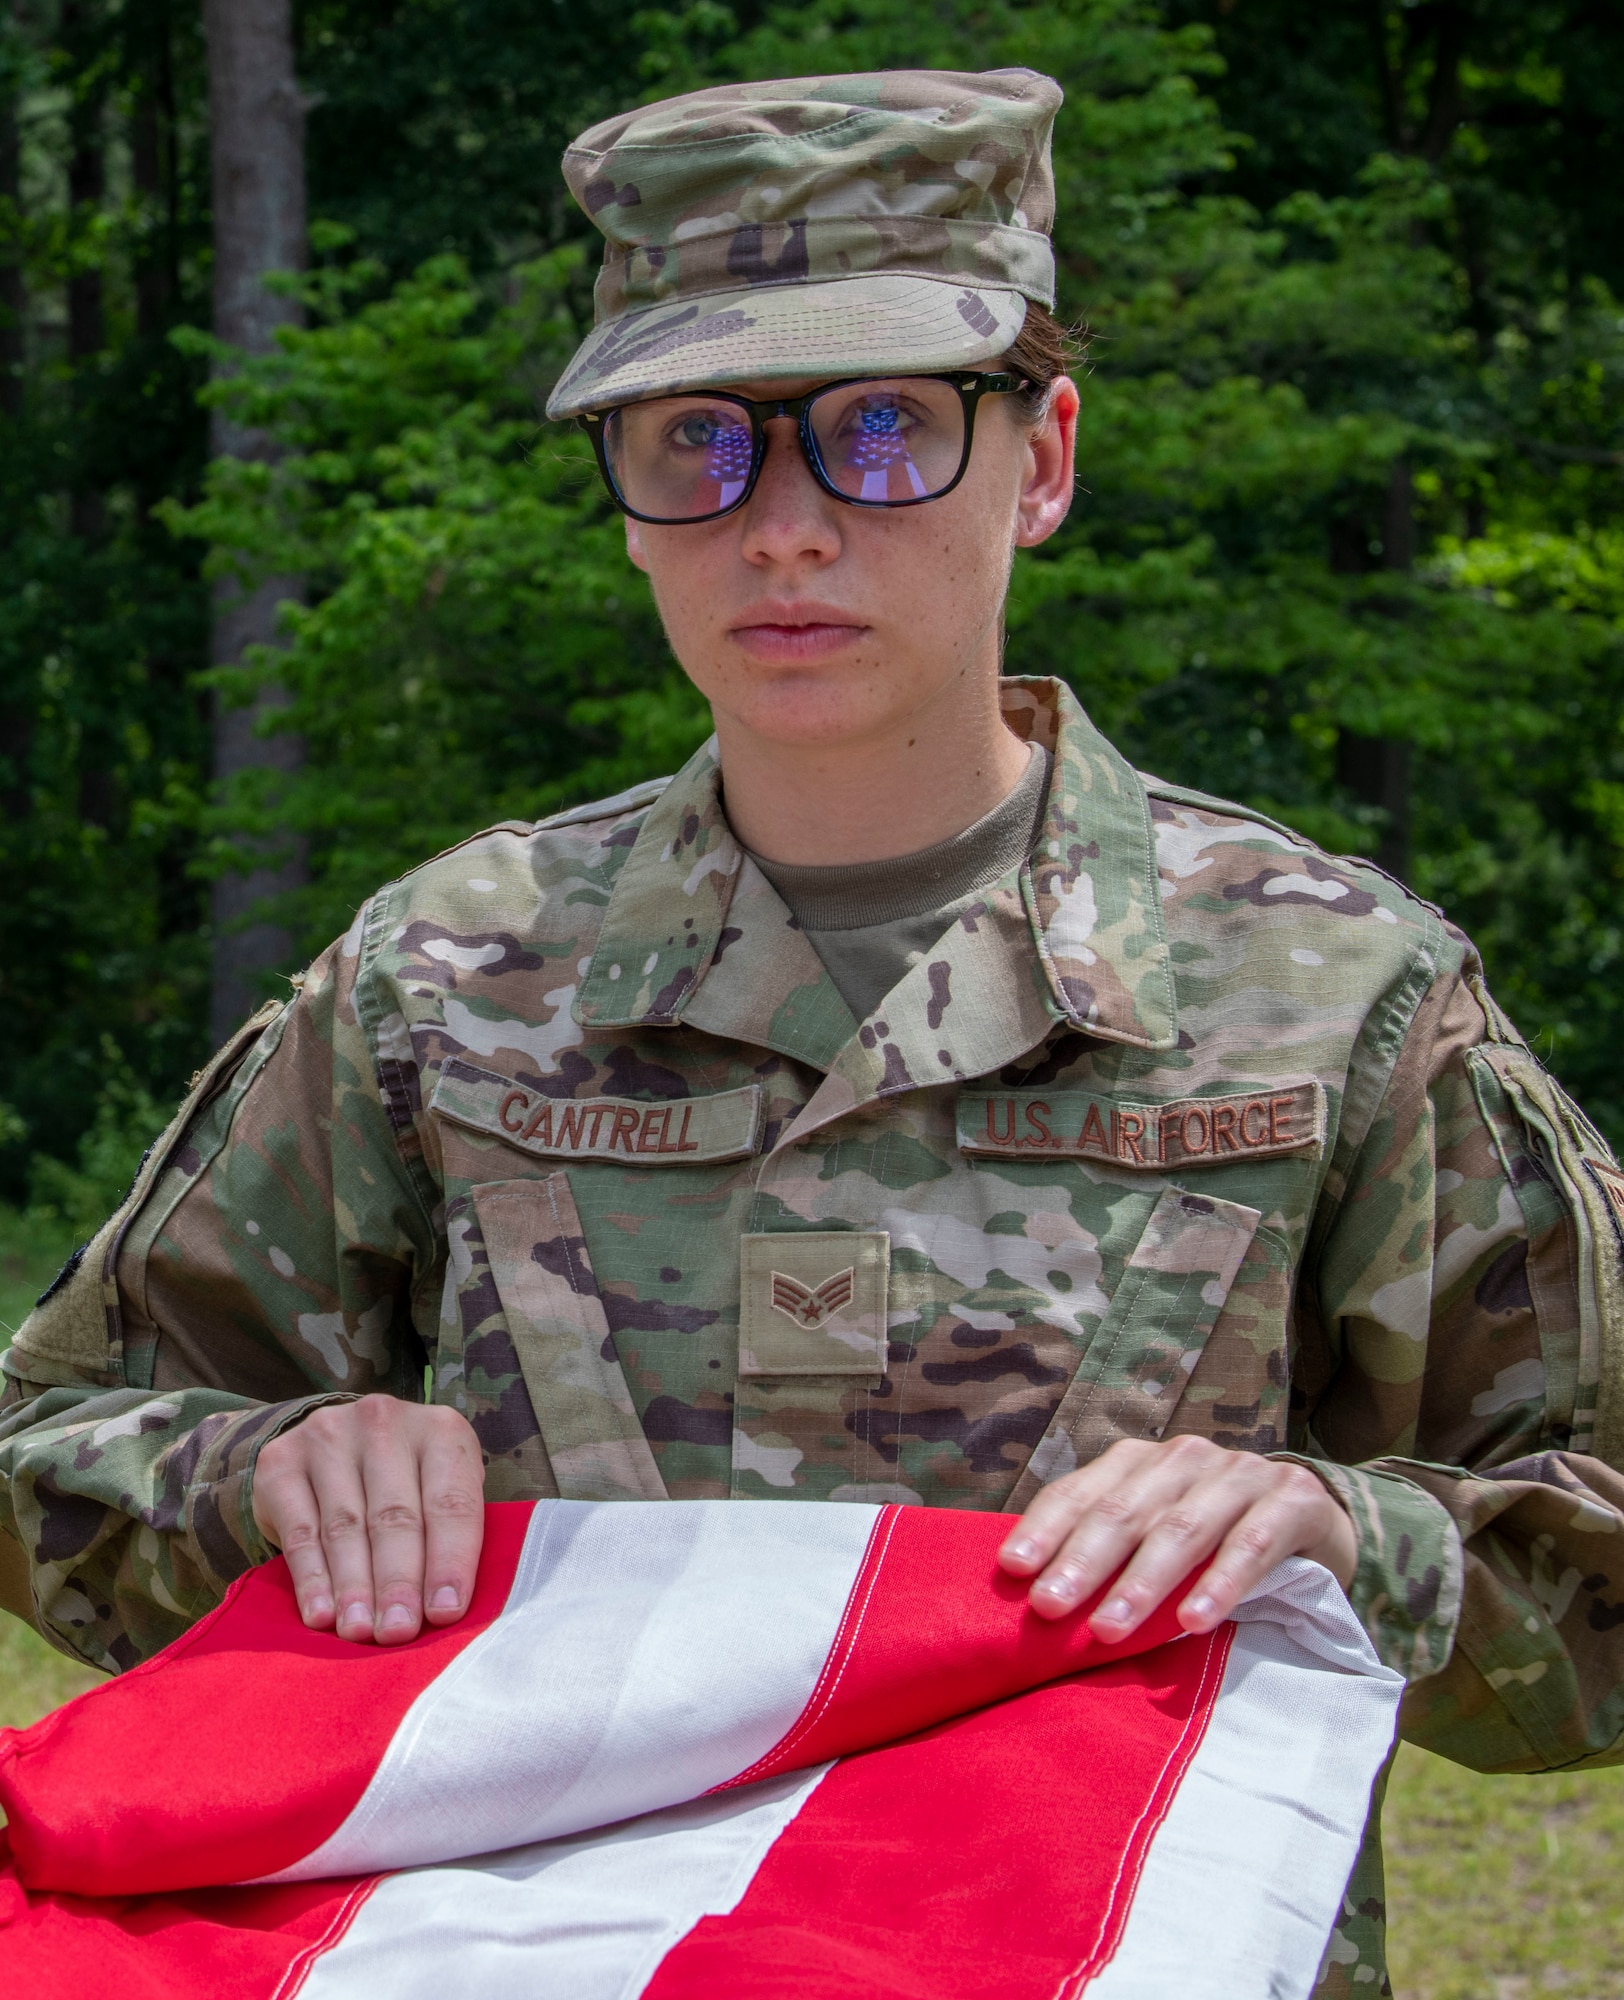 Senior Airman Hannah Cantrell, 333rd Fighter Generation Squadron aerospace propulsion journeyman, folds the American Flag in a practice flag folding ceremony at Seymour Johnson Air Force Base, North Carolina, June 14, 2022. Along with aerospace propulsion duties, Cantrell is also a member of the base honor guard. The honor guard responsibilities are to receive or guard a head of state or other dignitaries, the fallen in war, or to attend state ceremonials or funerals. (U.S. Air Force photo by Airman 1st Class Sabrina Fuller)